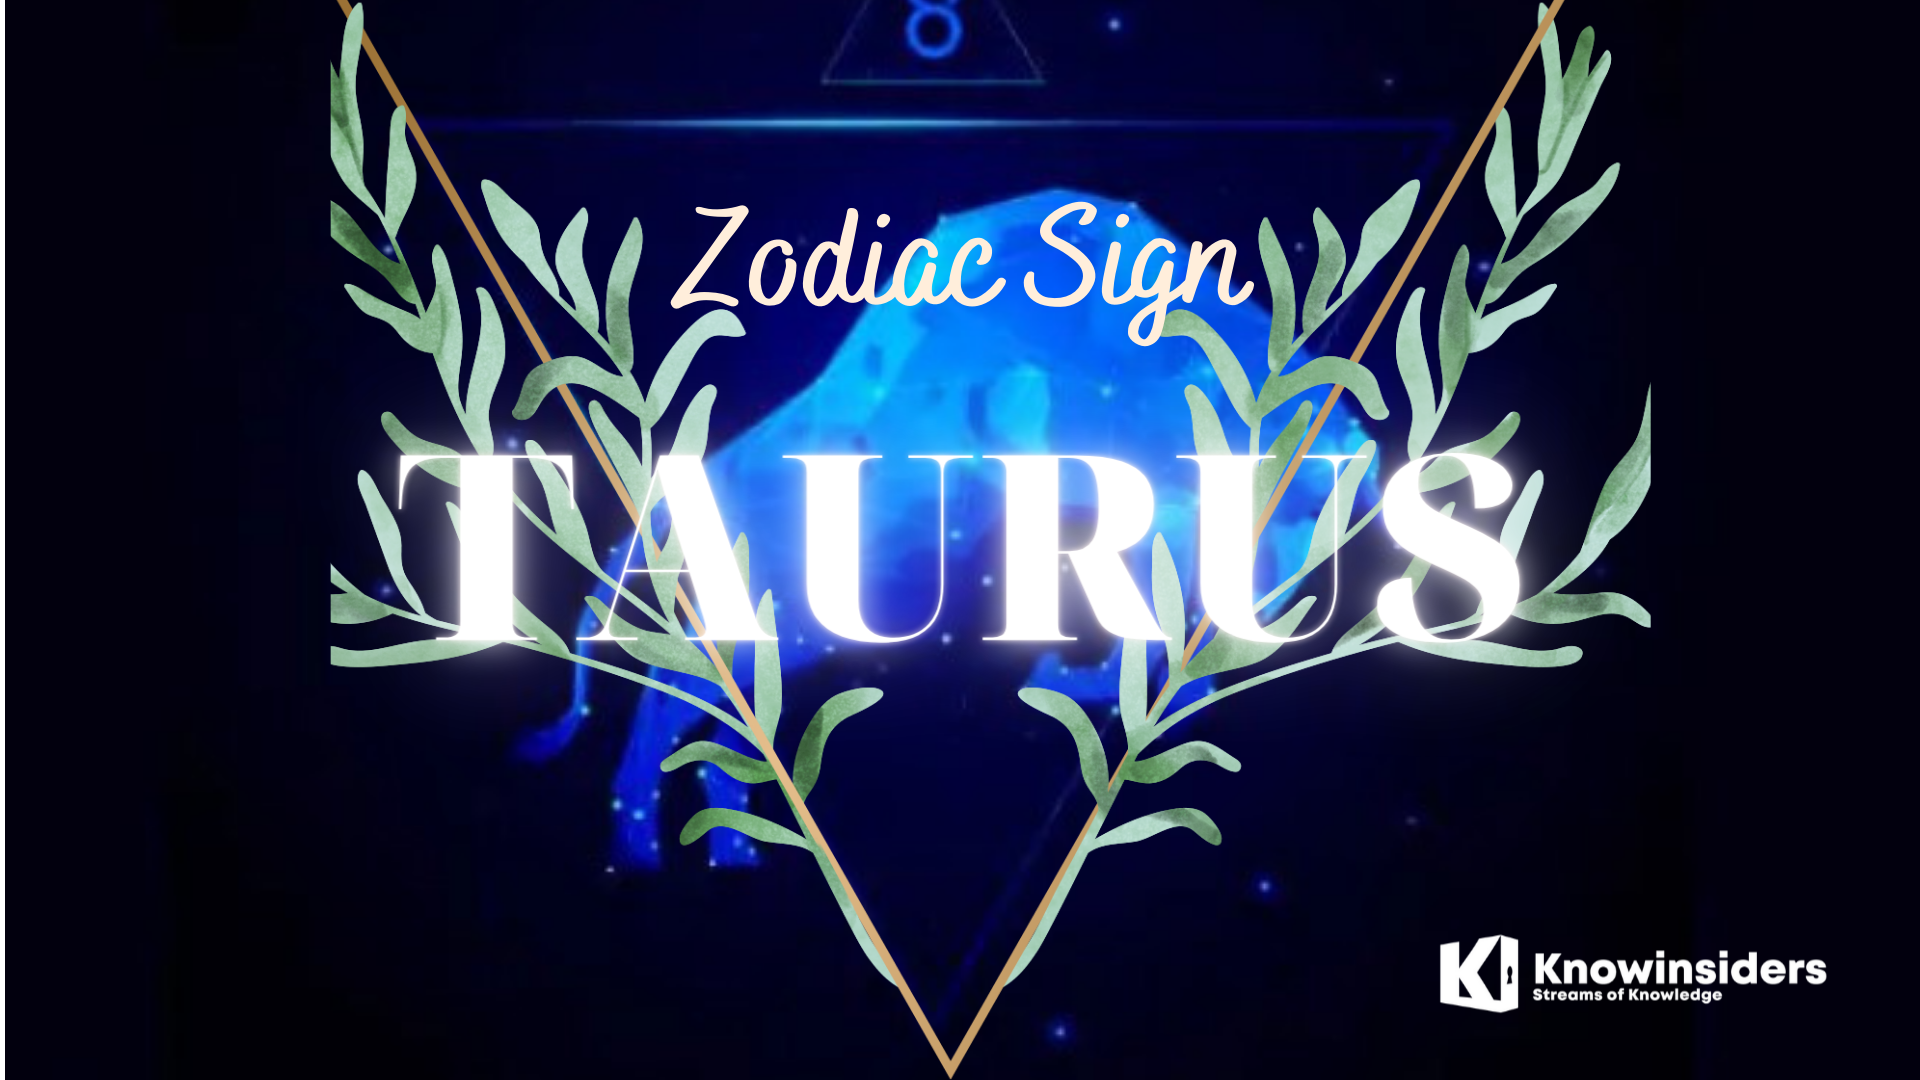 Top 5 Most Loyal Zodiac Signs According To Astrology